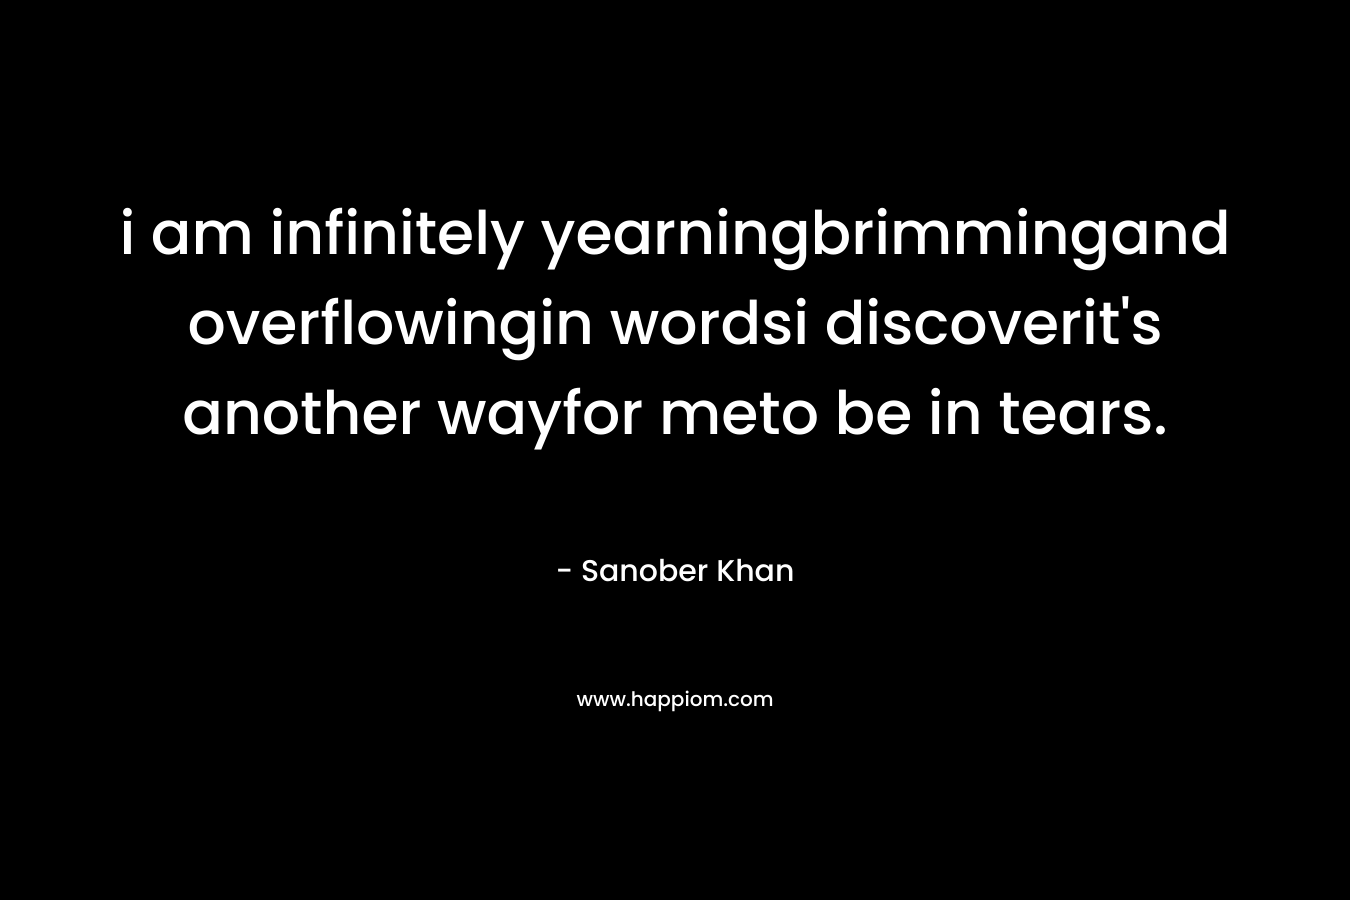 i am infinitely yearningbrimmingand overflowingin wordsi discoverit’s another wayfor meto be in tears. – Sanober  Khan